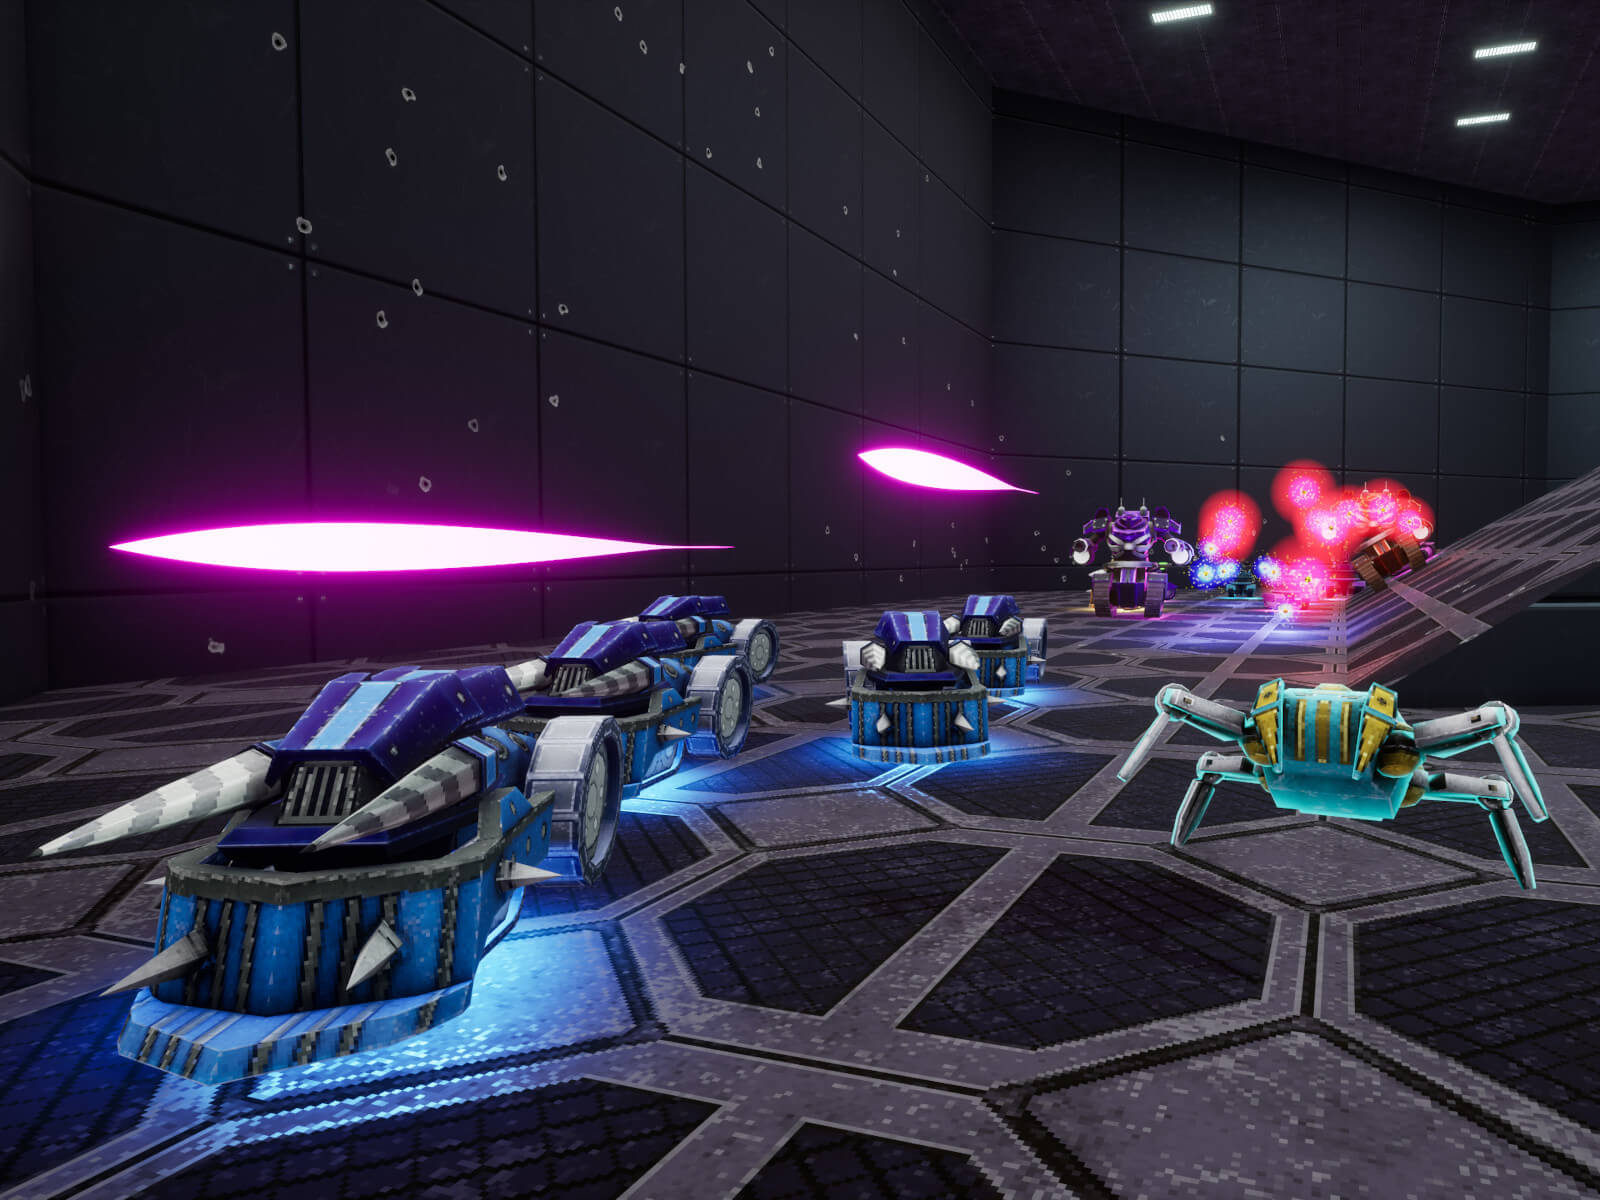 Game screenshot from OMFG: One Million Fatal Guns; room filled with deadly enemy robots